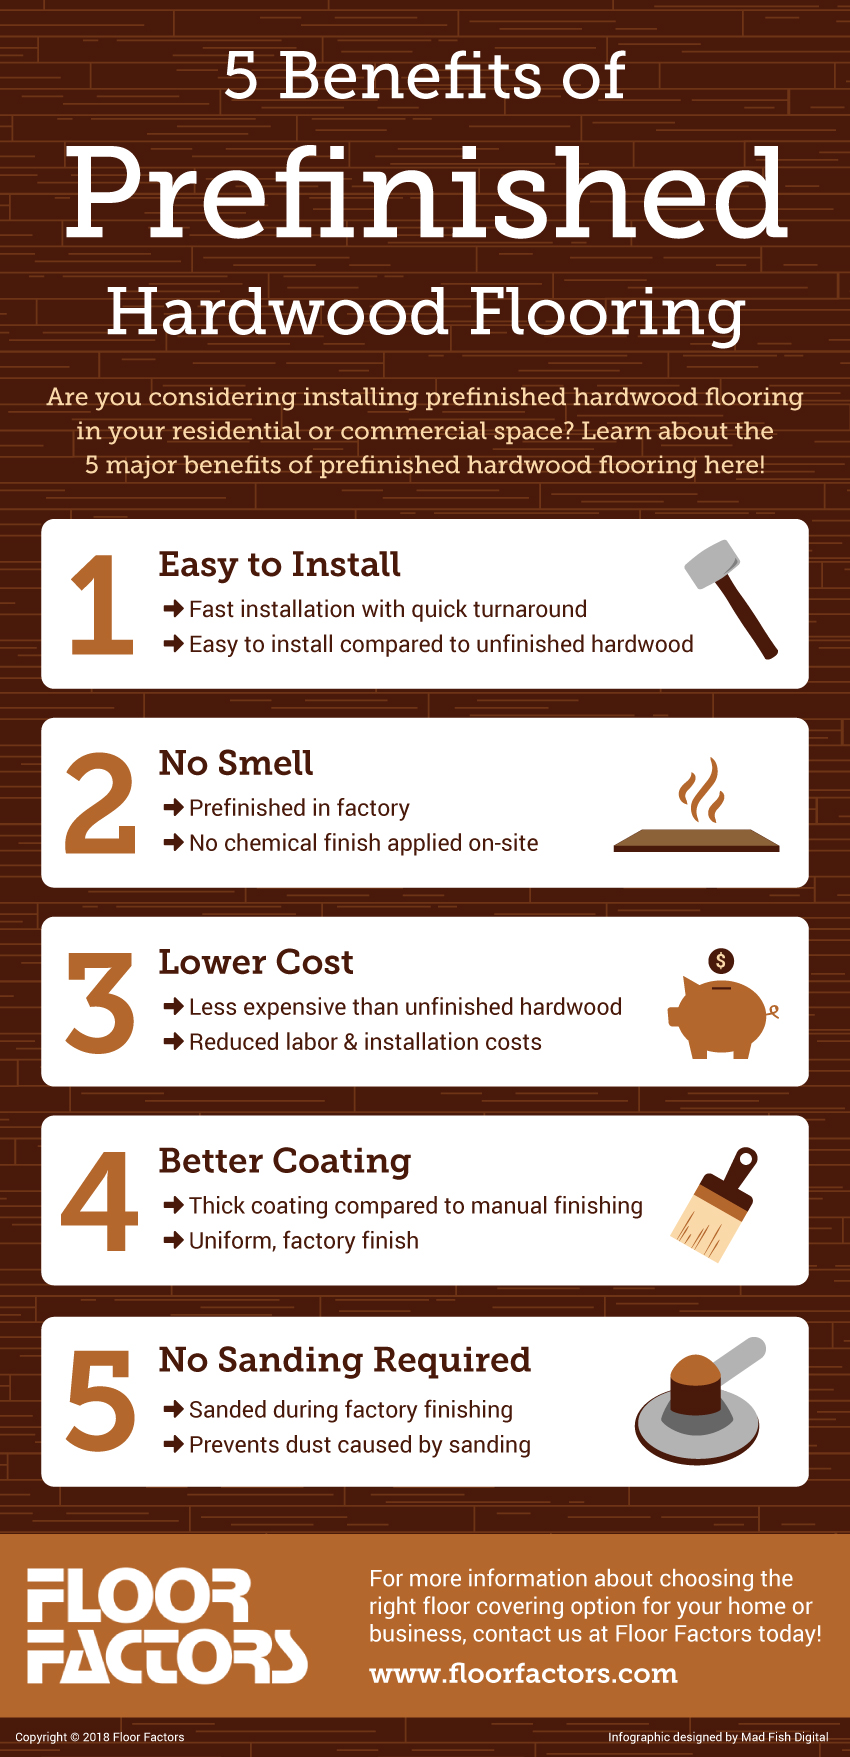 Prefinished Hardwood Bamboo Flooring, How Much Does It Cost To Install Prefinished Hardwood Floors